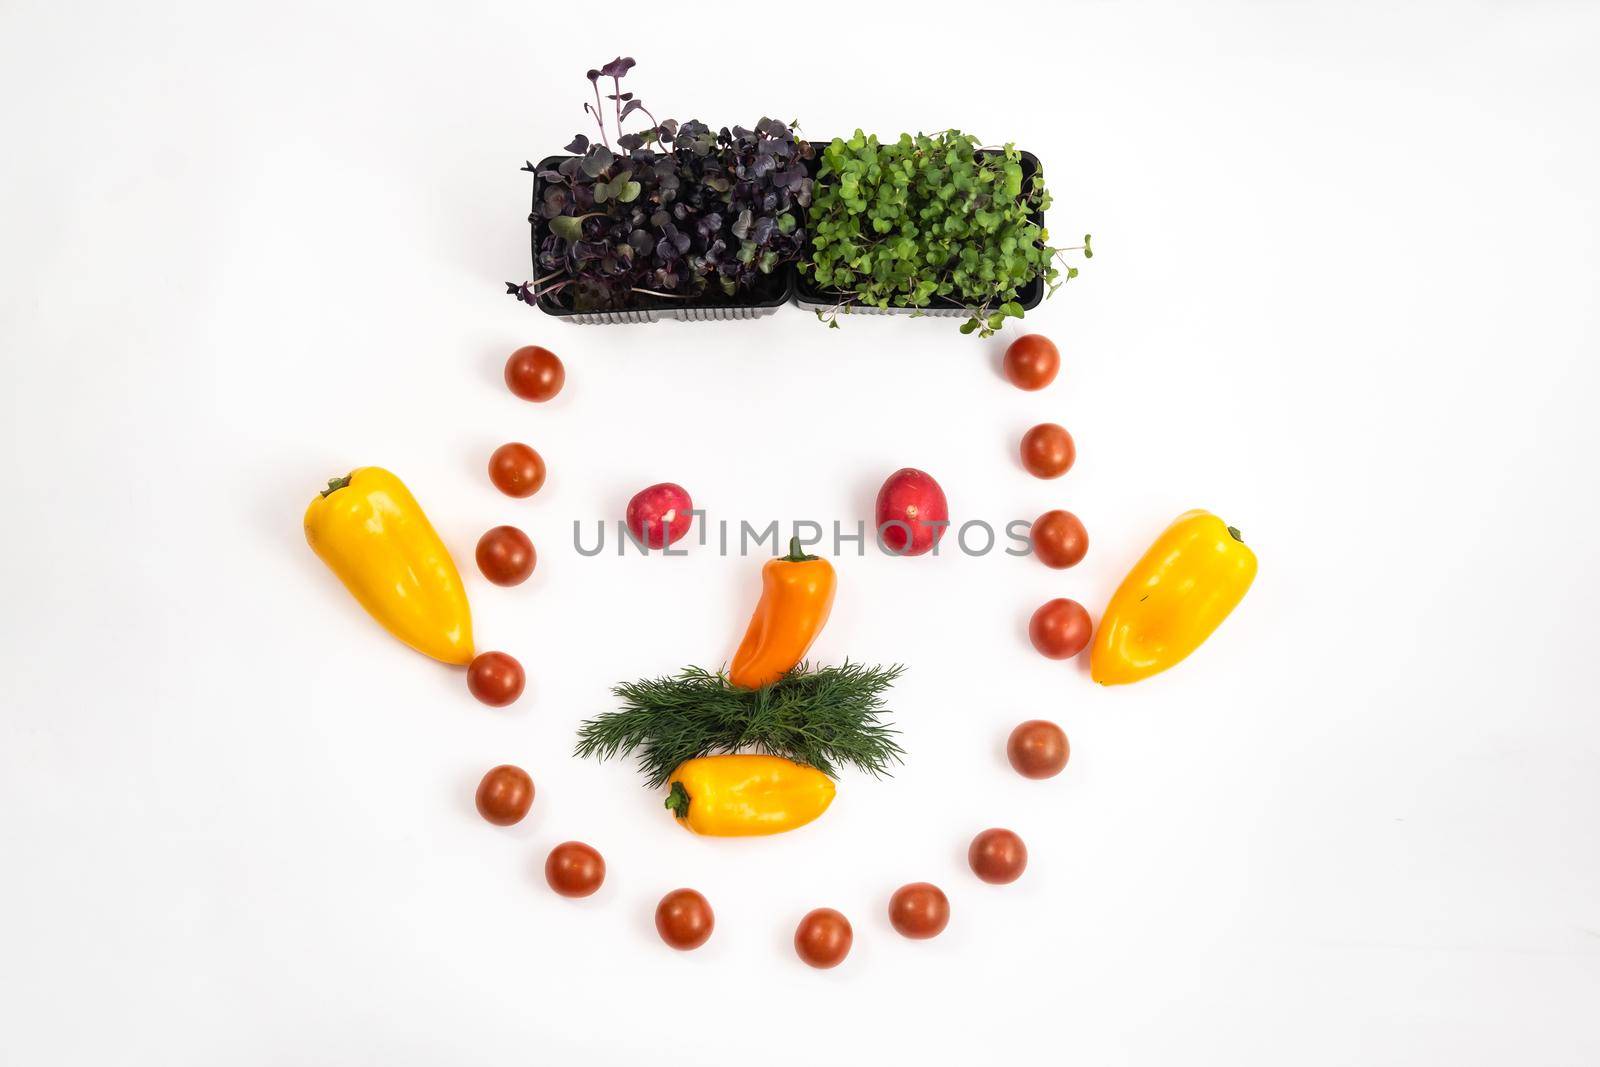 The face of a man made of sliced vegetables on a white background by Lobachad